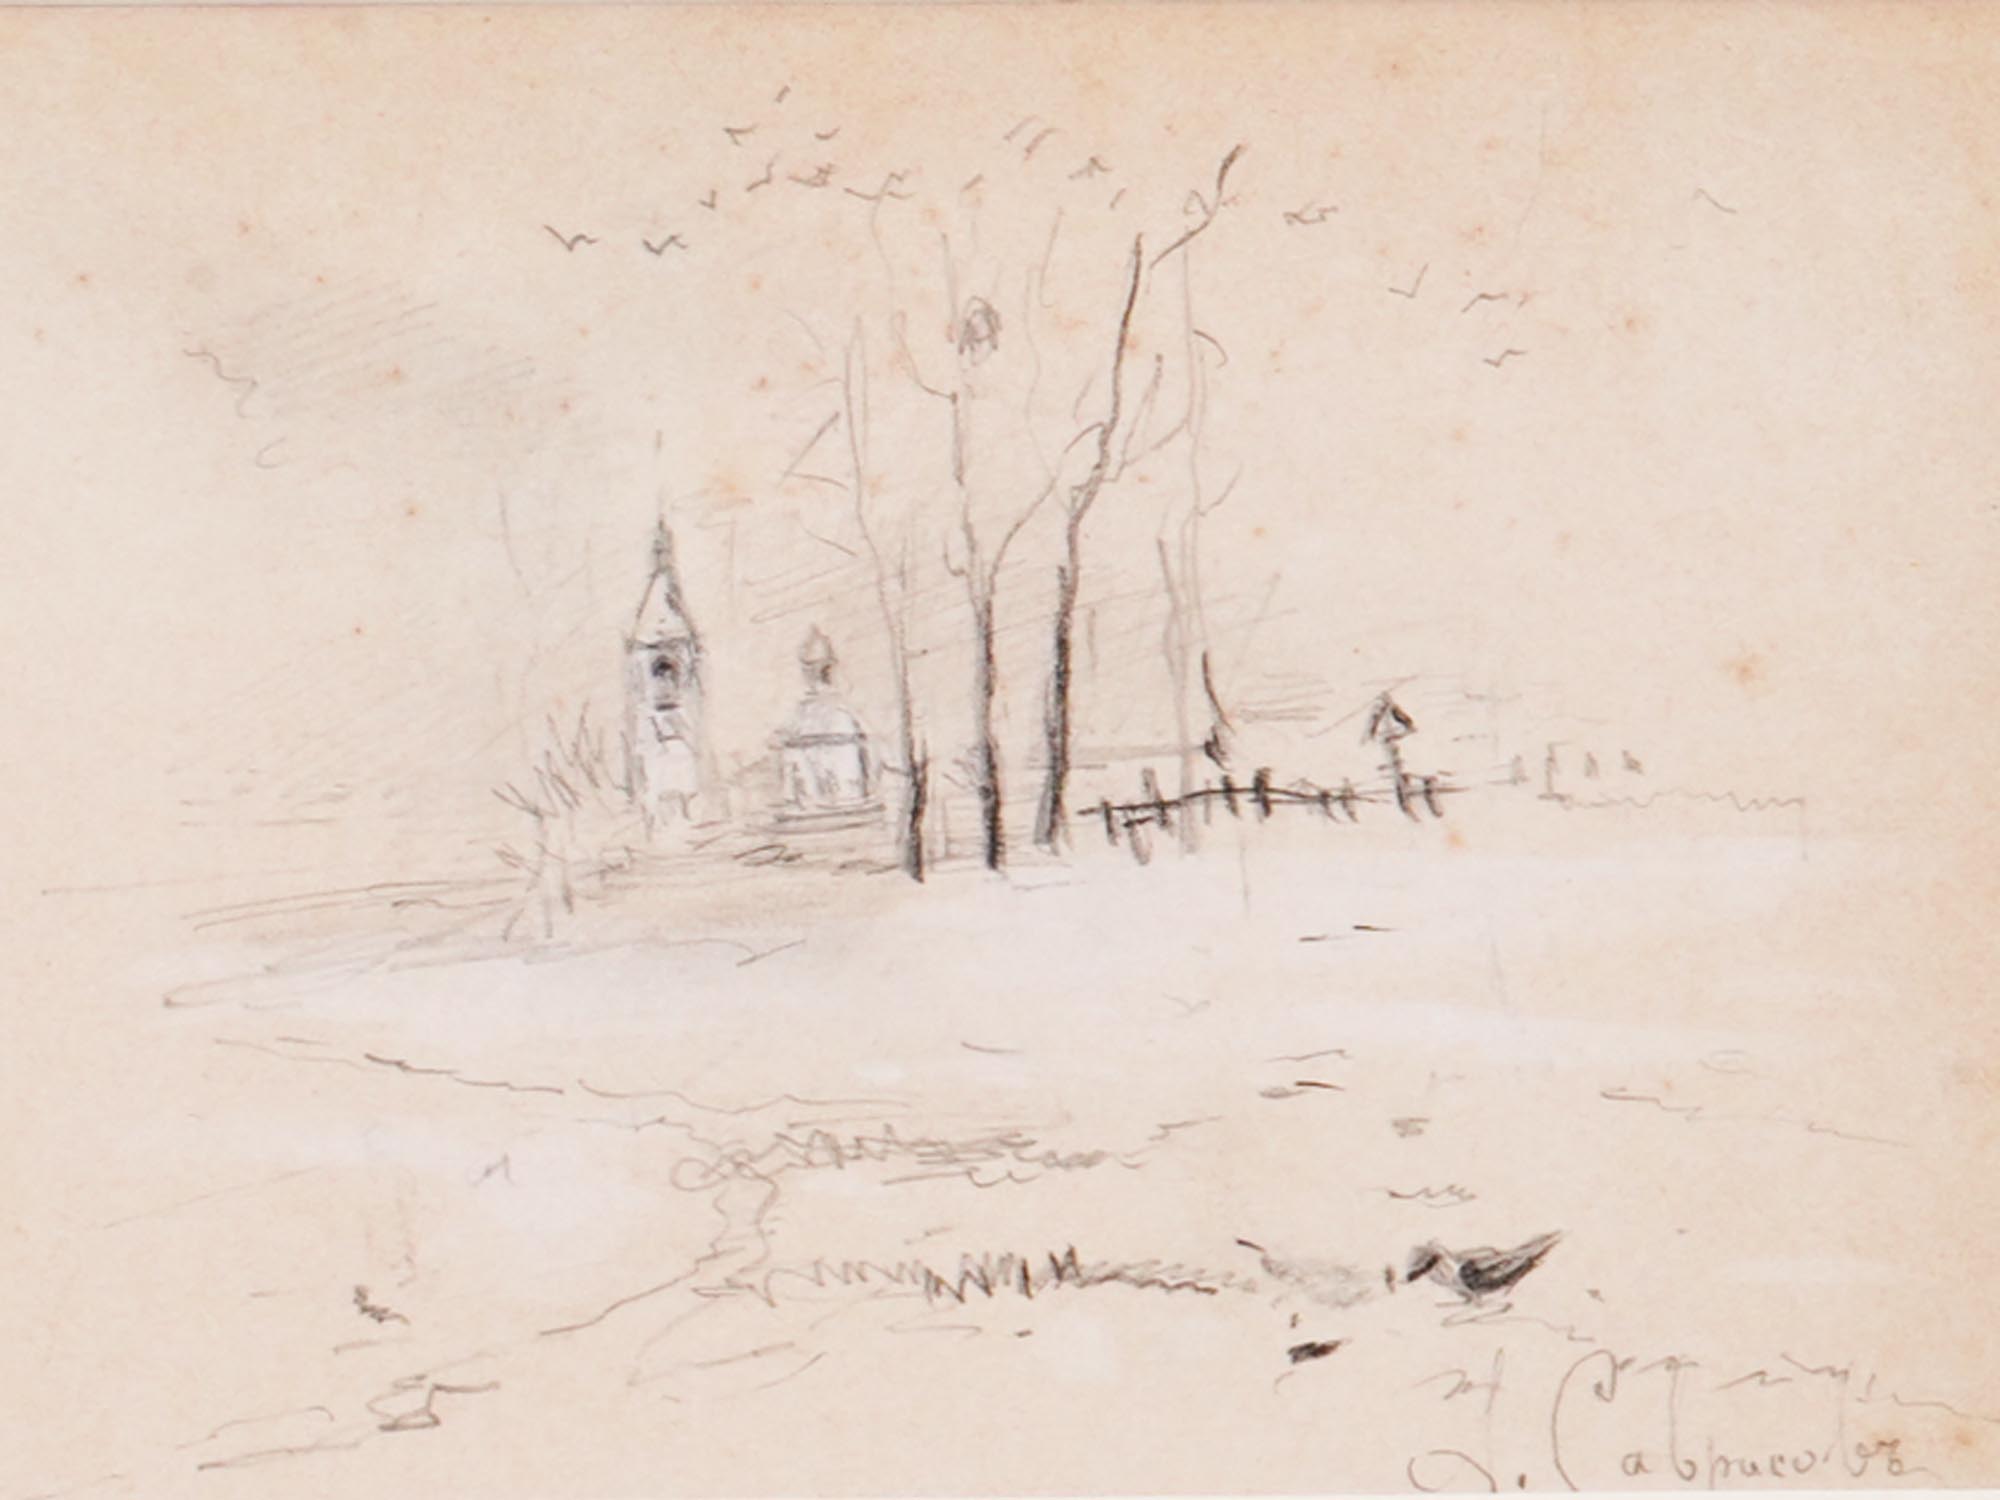 RUSSIAN SKETCH GRAPHITE PAINTING BY ALEXEI SAVRASOV PIC-1